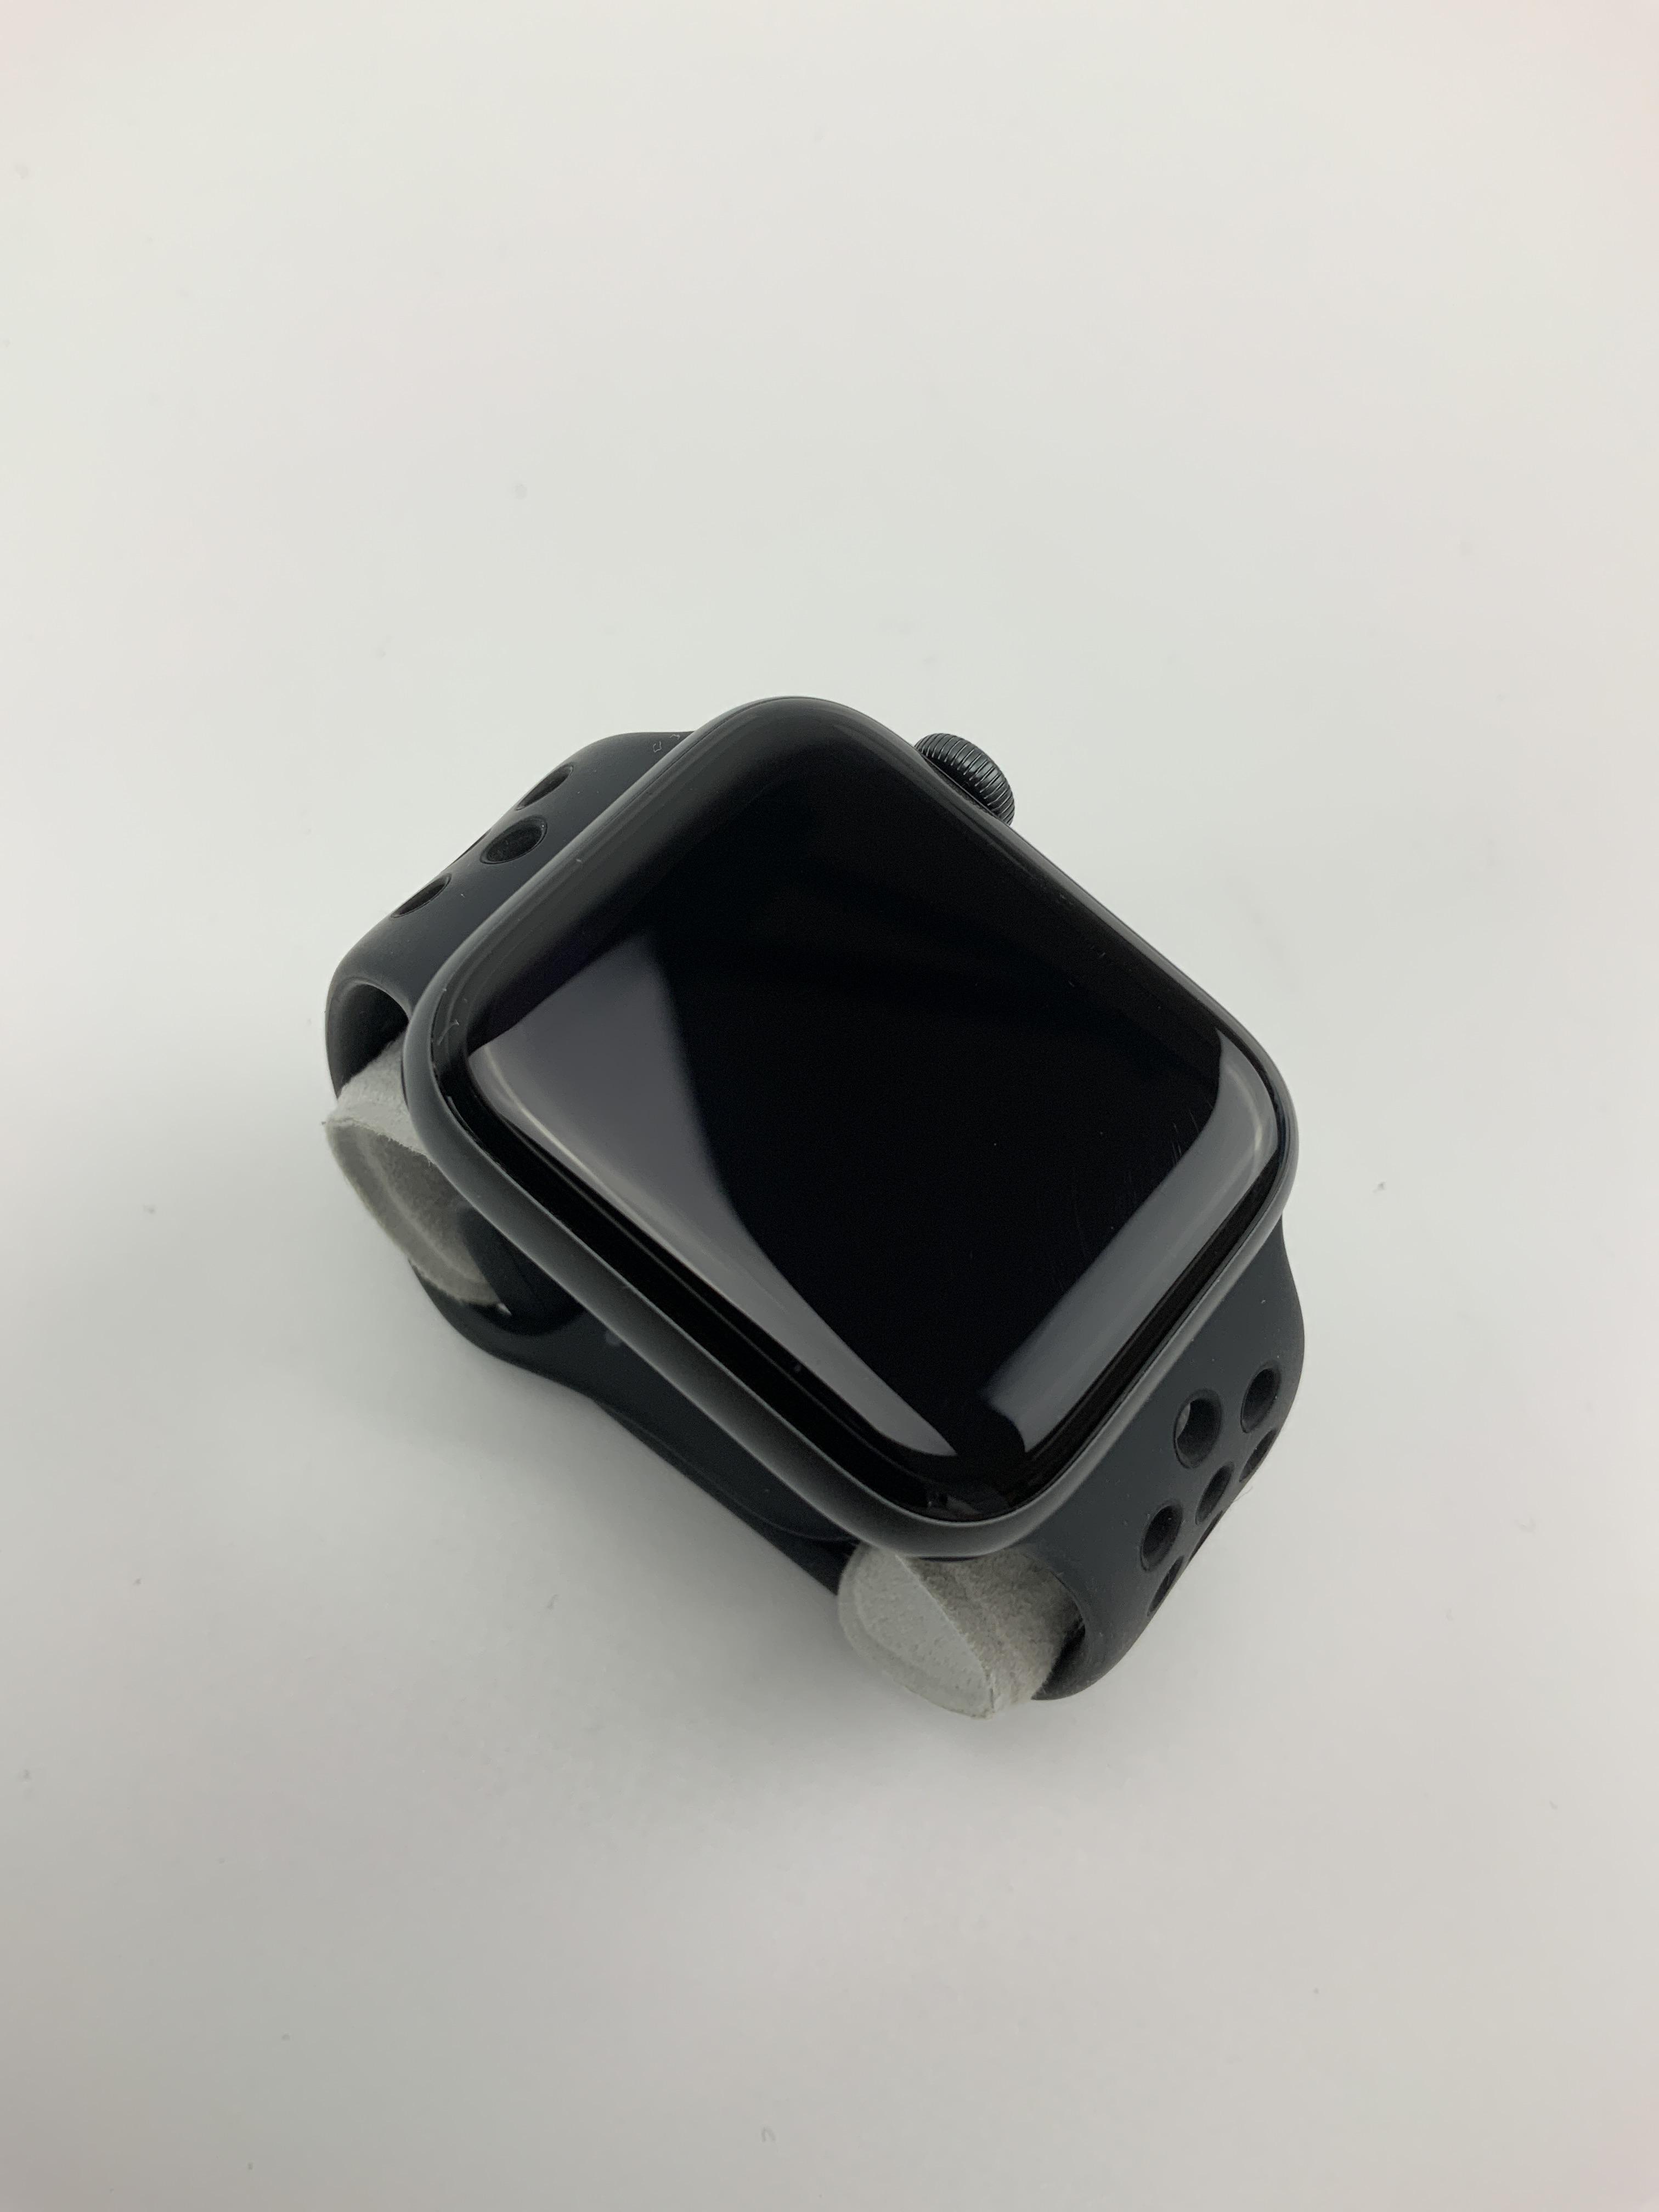 Watch Series 5 Aluminum Cellular (44mm), Space Gray, Afbeelding 3